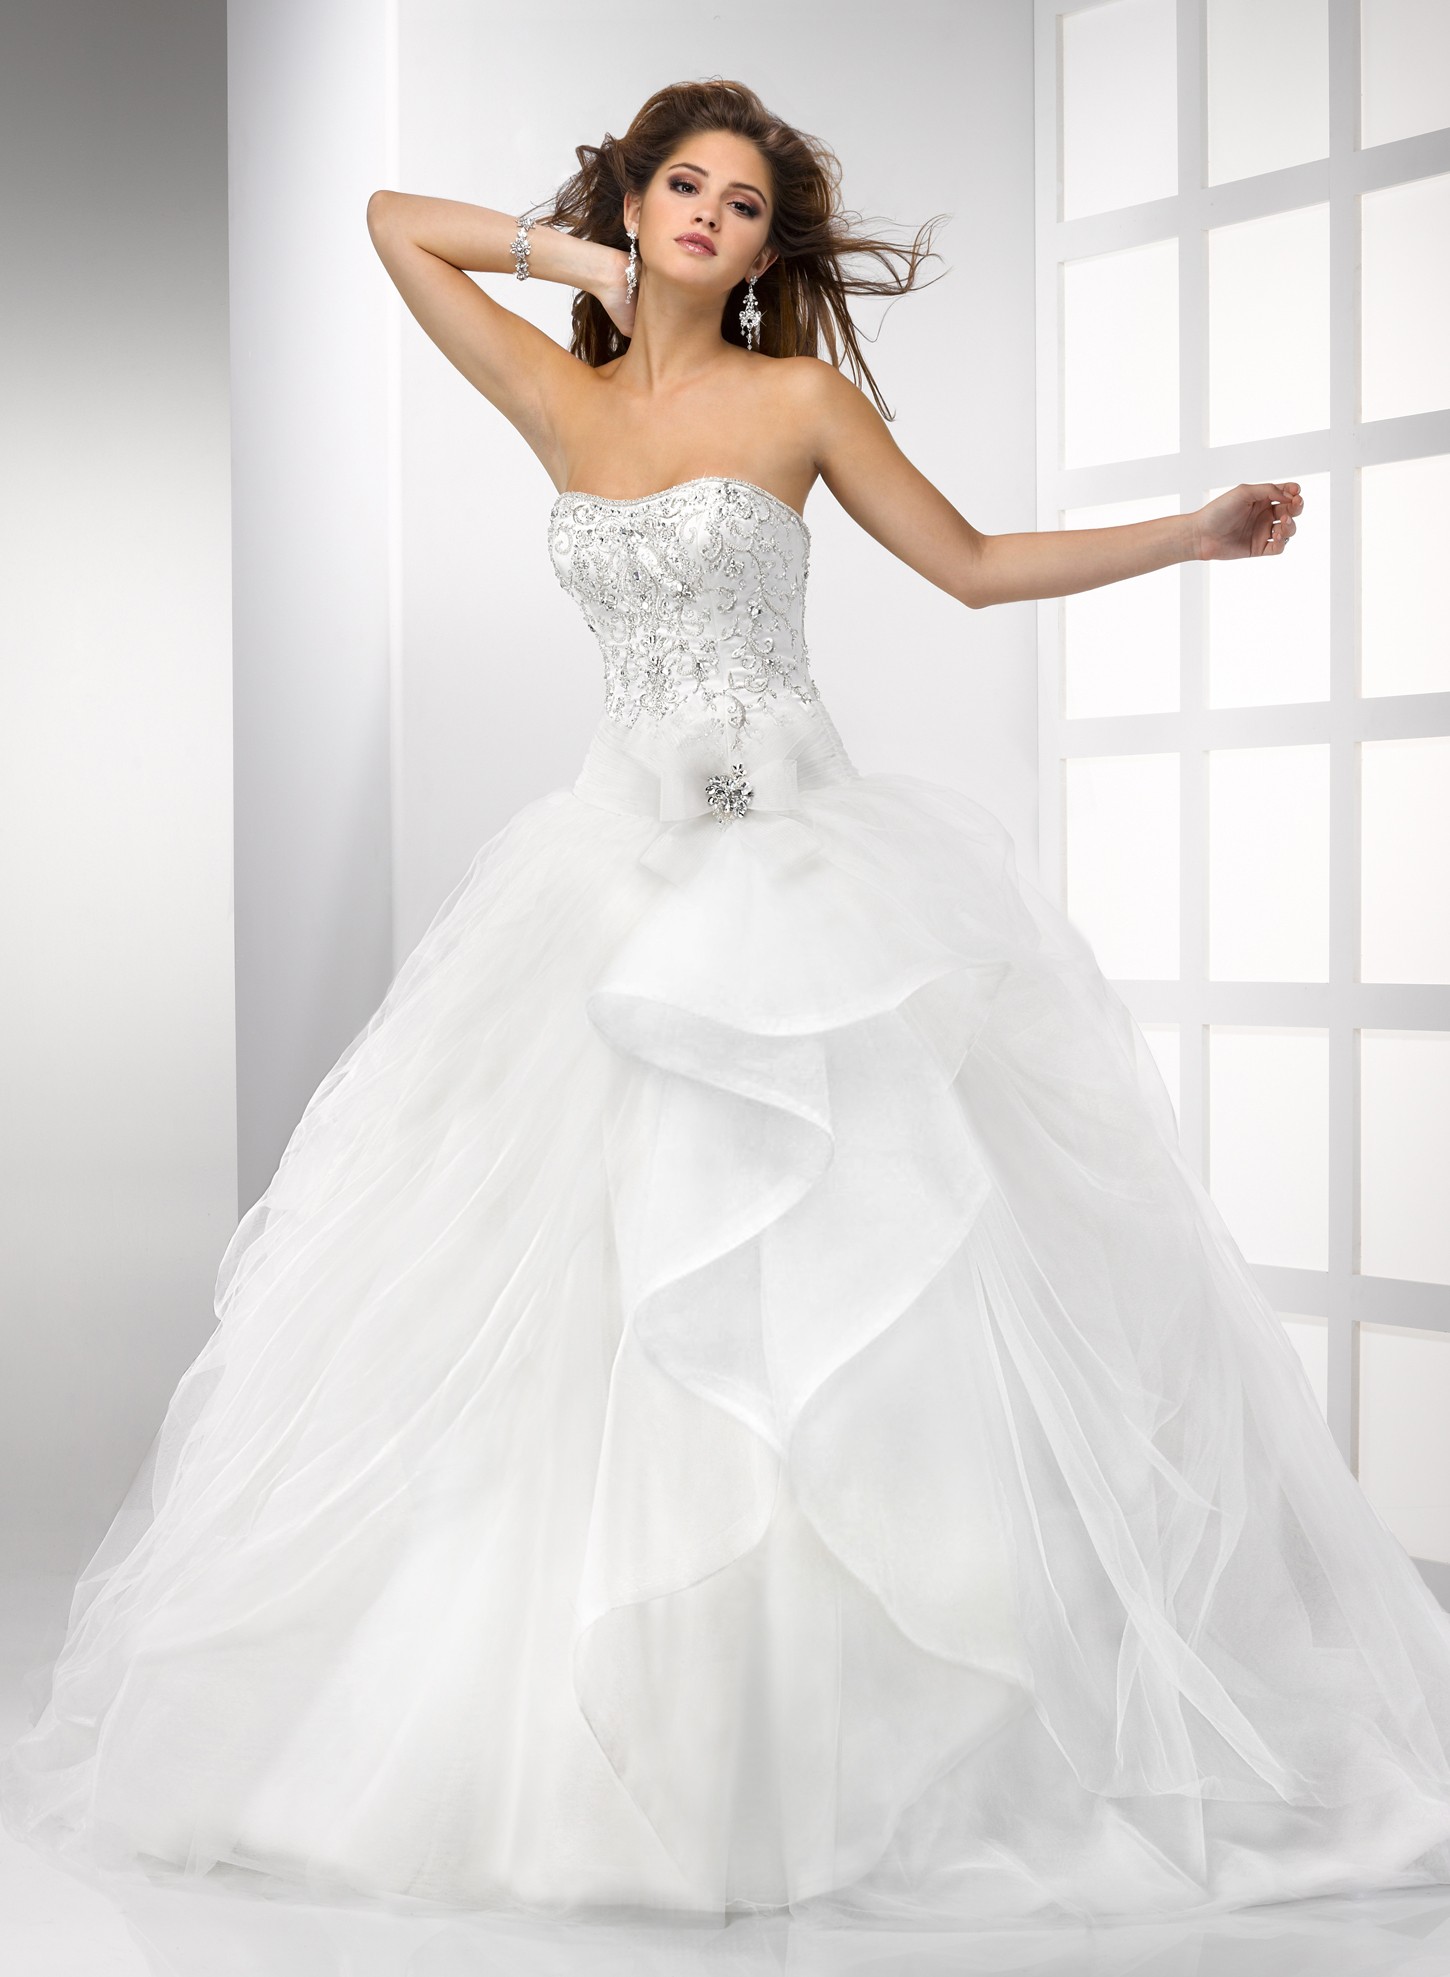 Irresistible Attraction Ball Gown